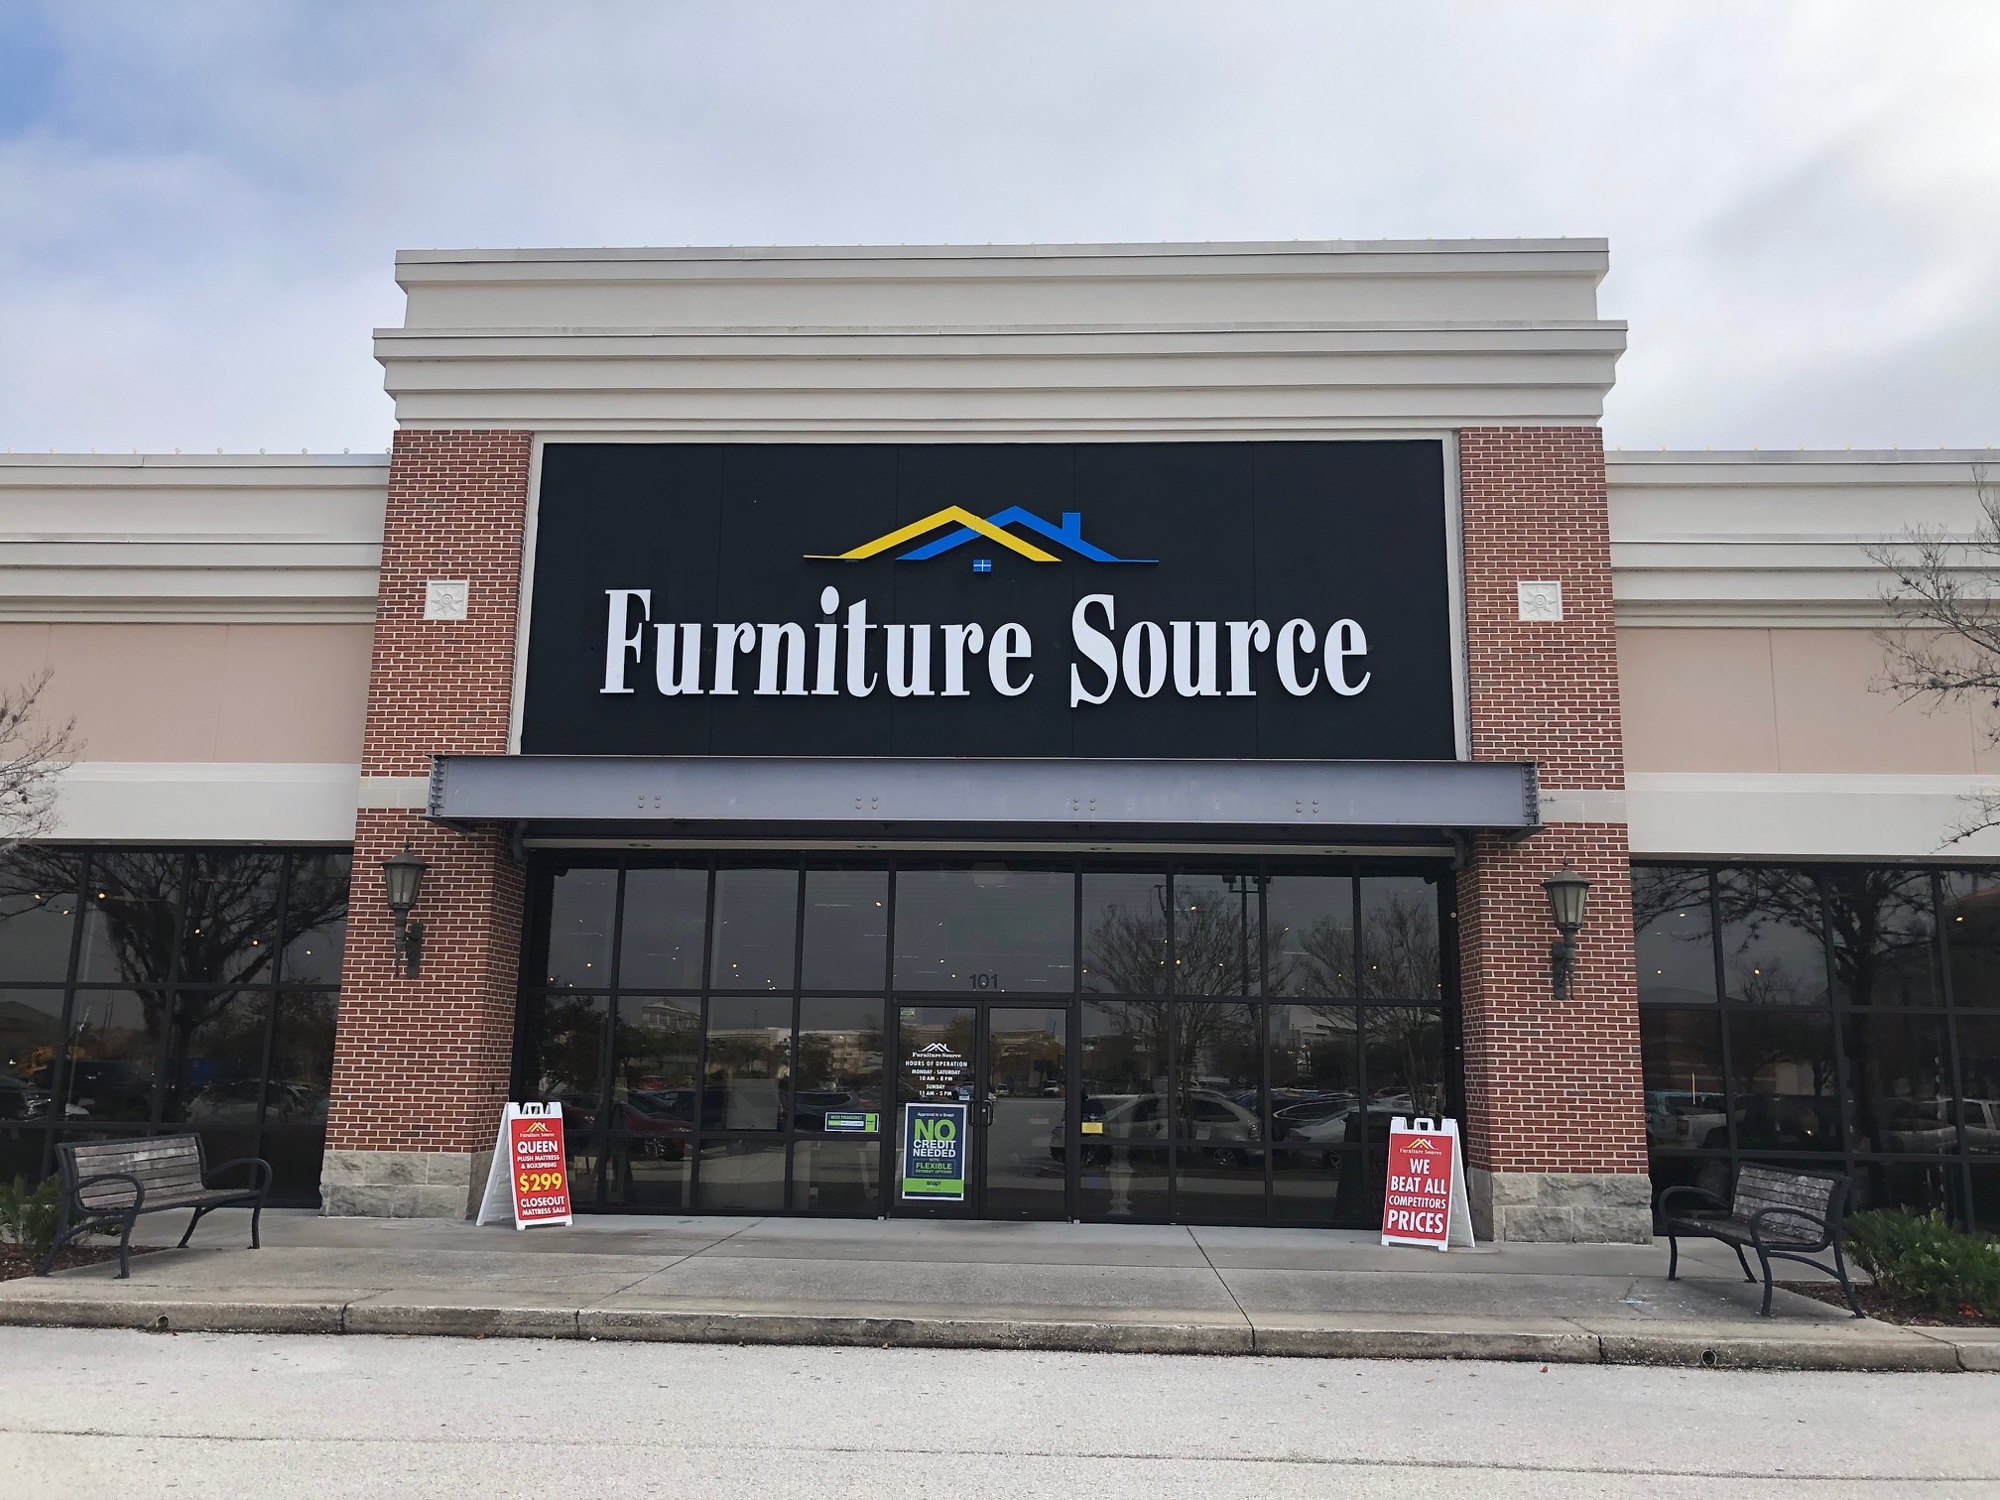 The Furniture Source store at St. Johns Town Center.